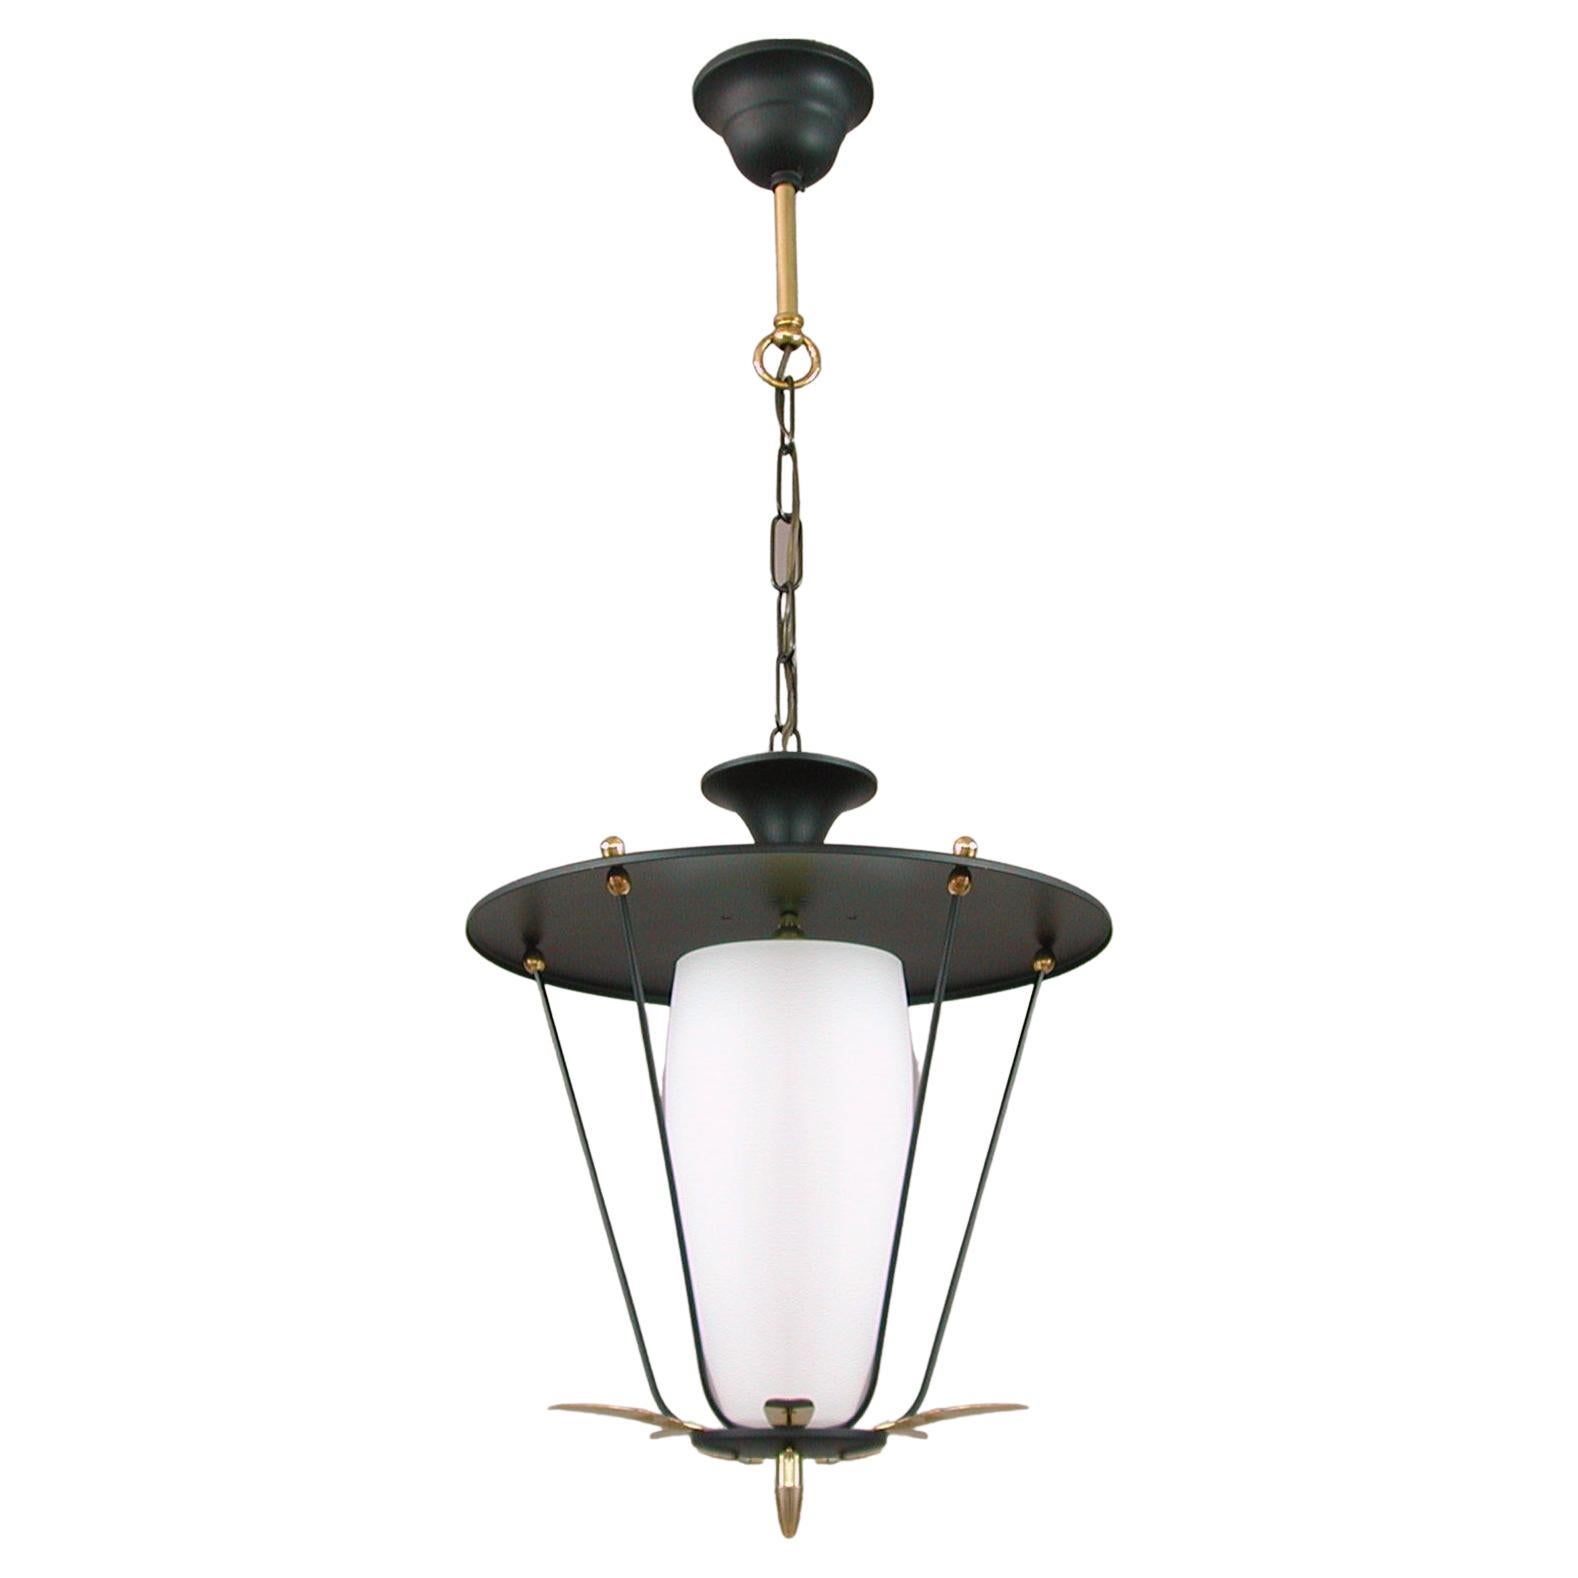 Midcentury French Black and White Opaline Lantern with Brass Details, 1950s